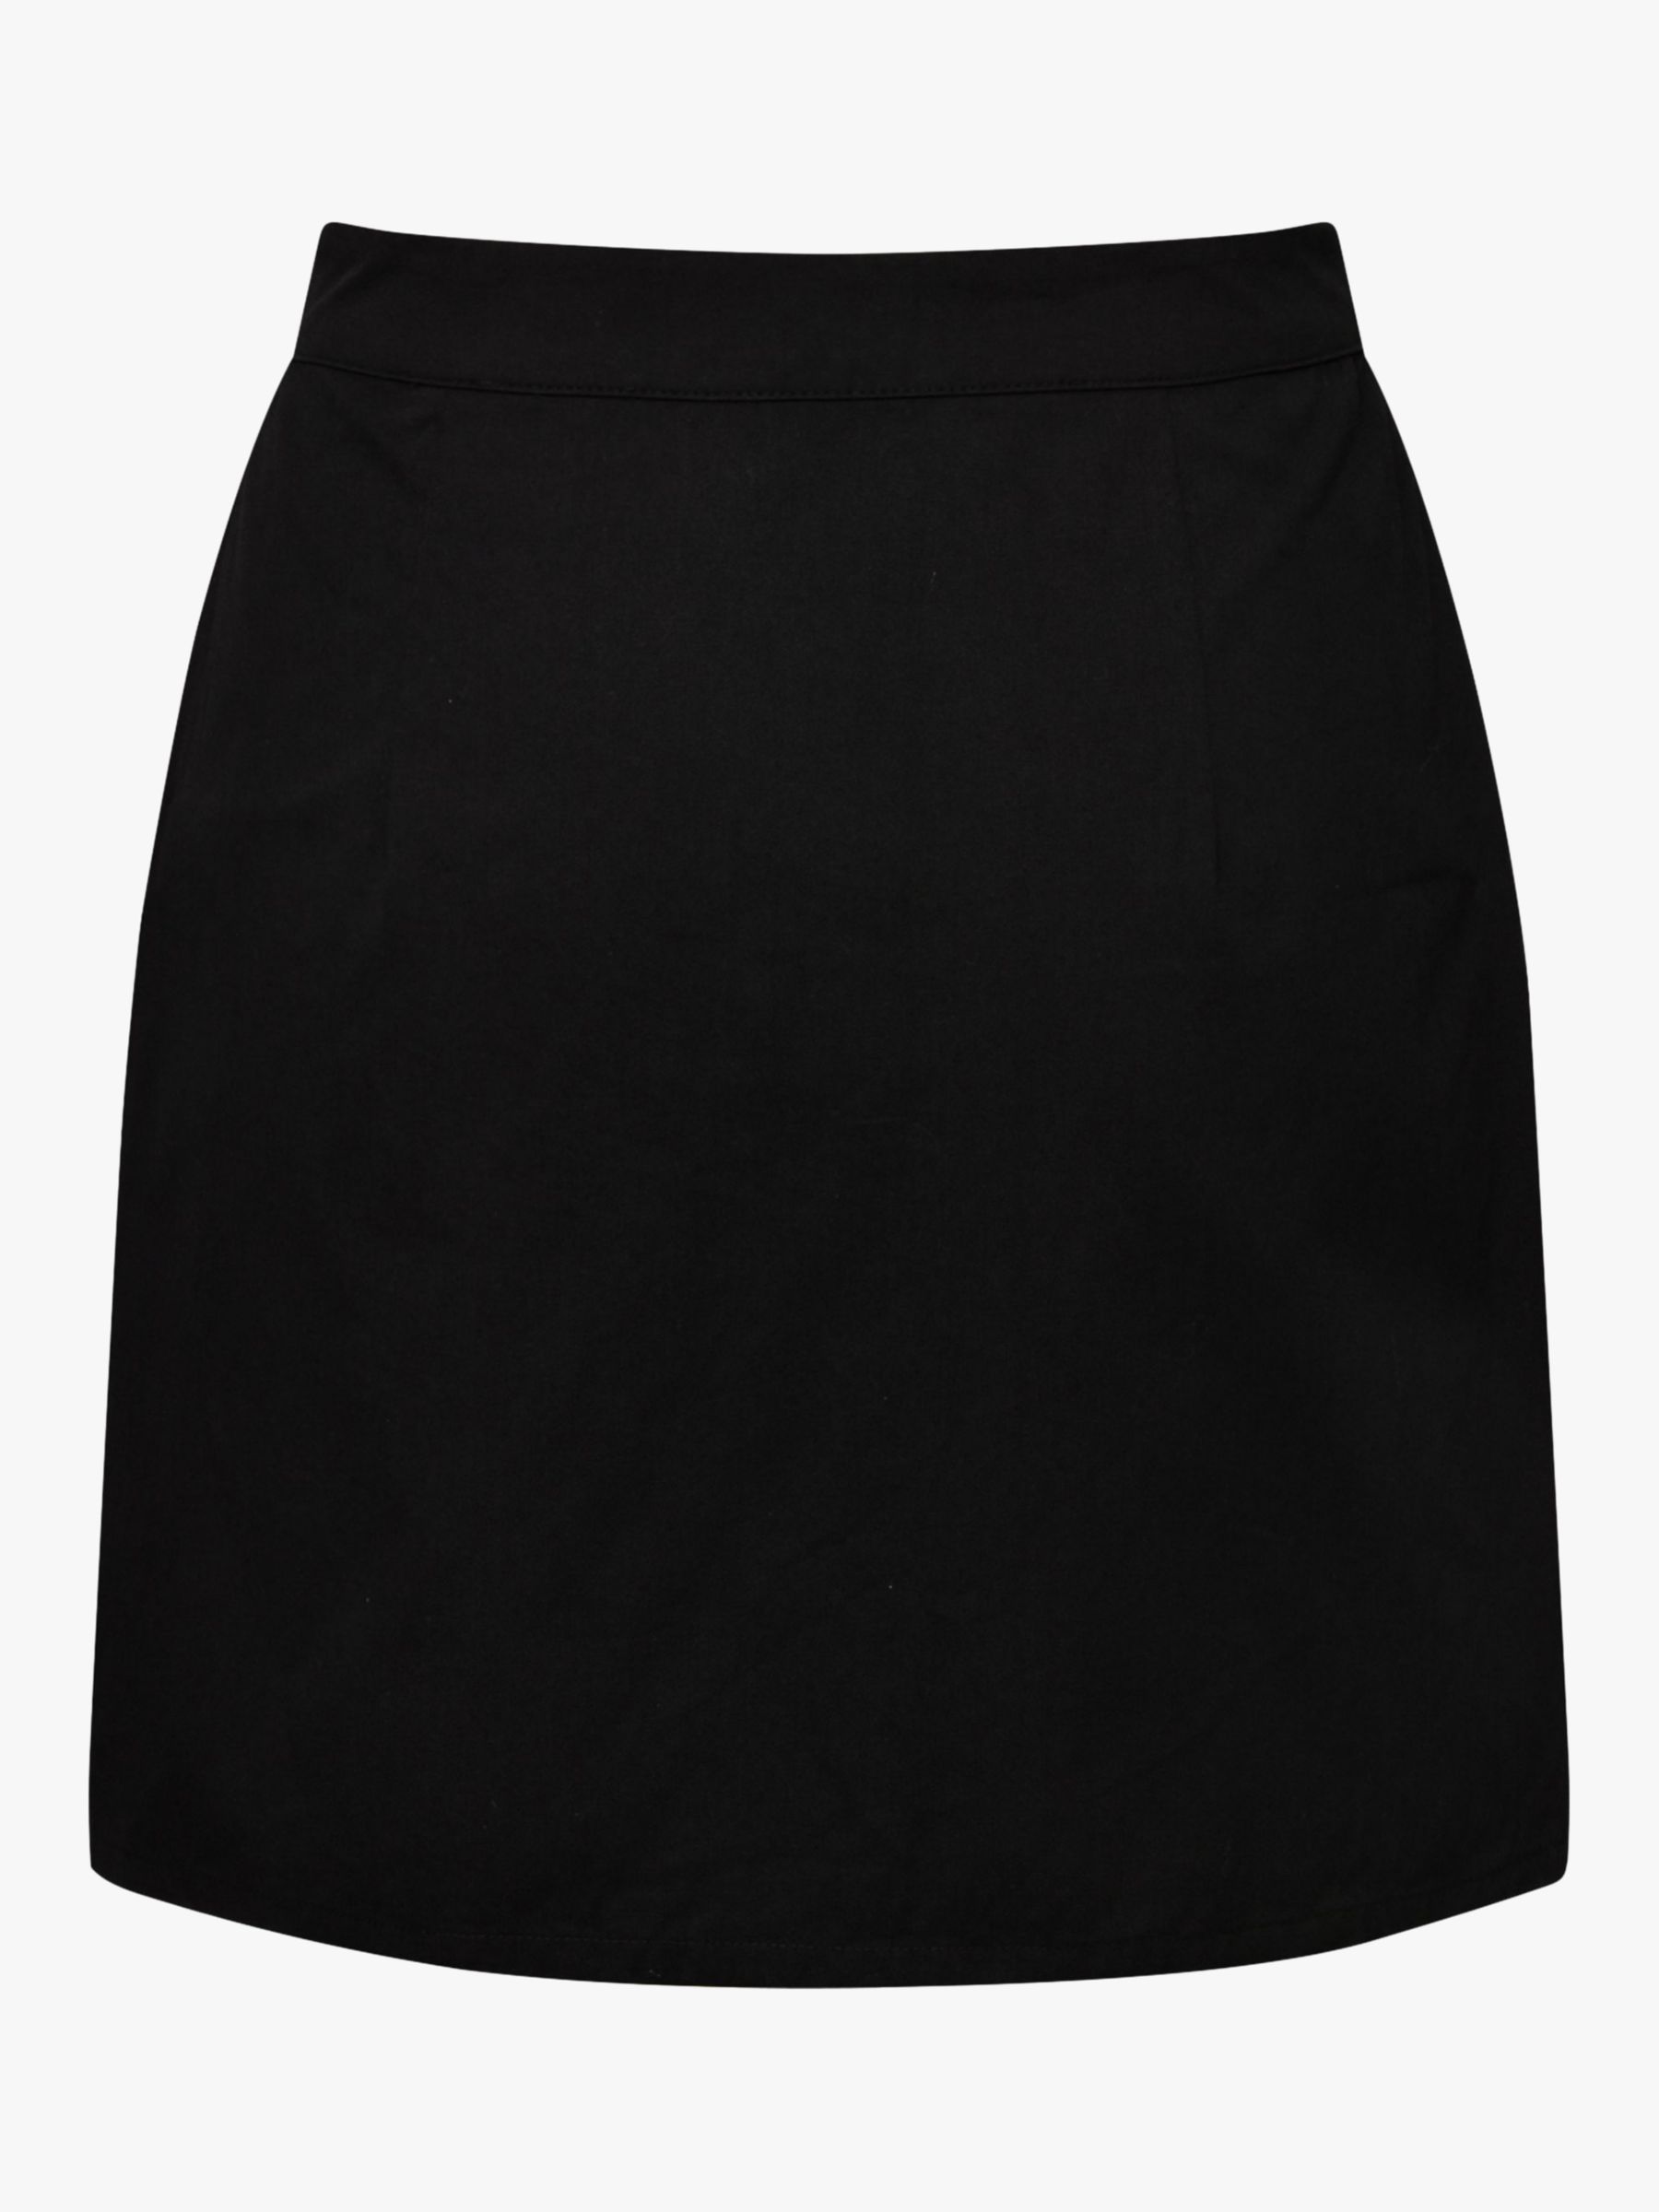 Buy A-VIEW Calle New Mini Skirt, Black Online at johnlewis.com